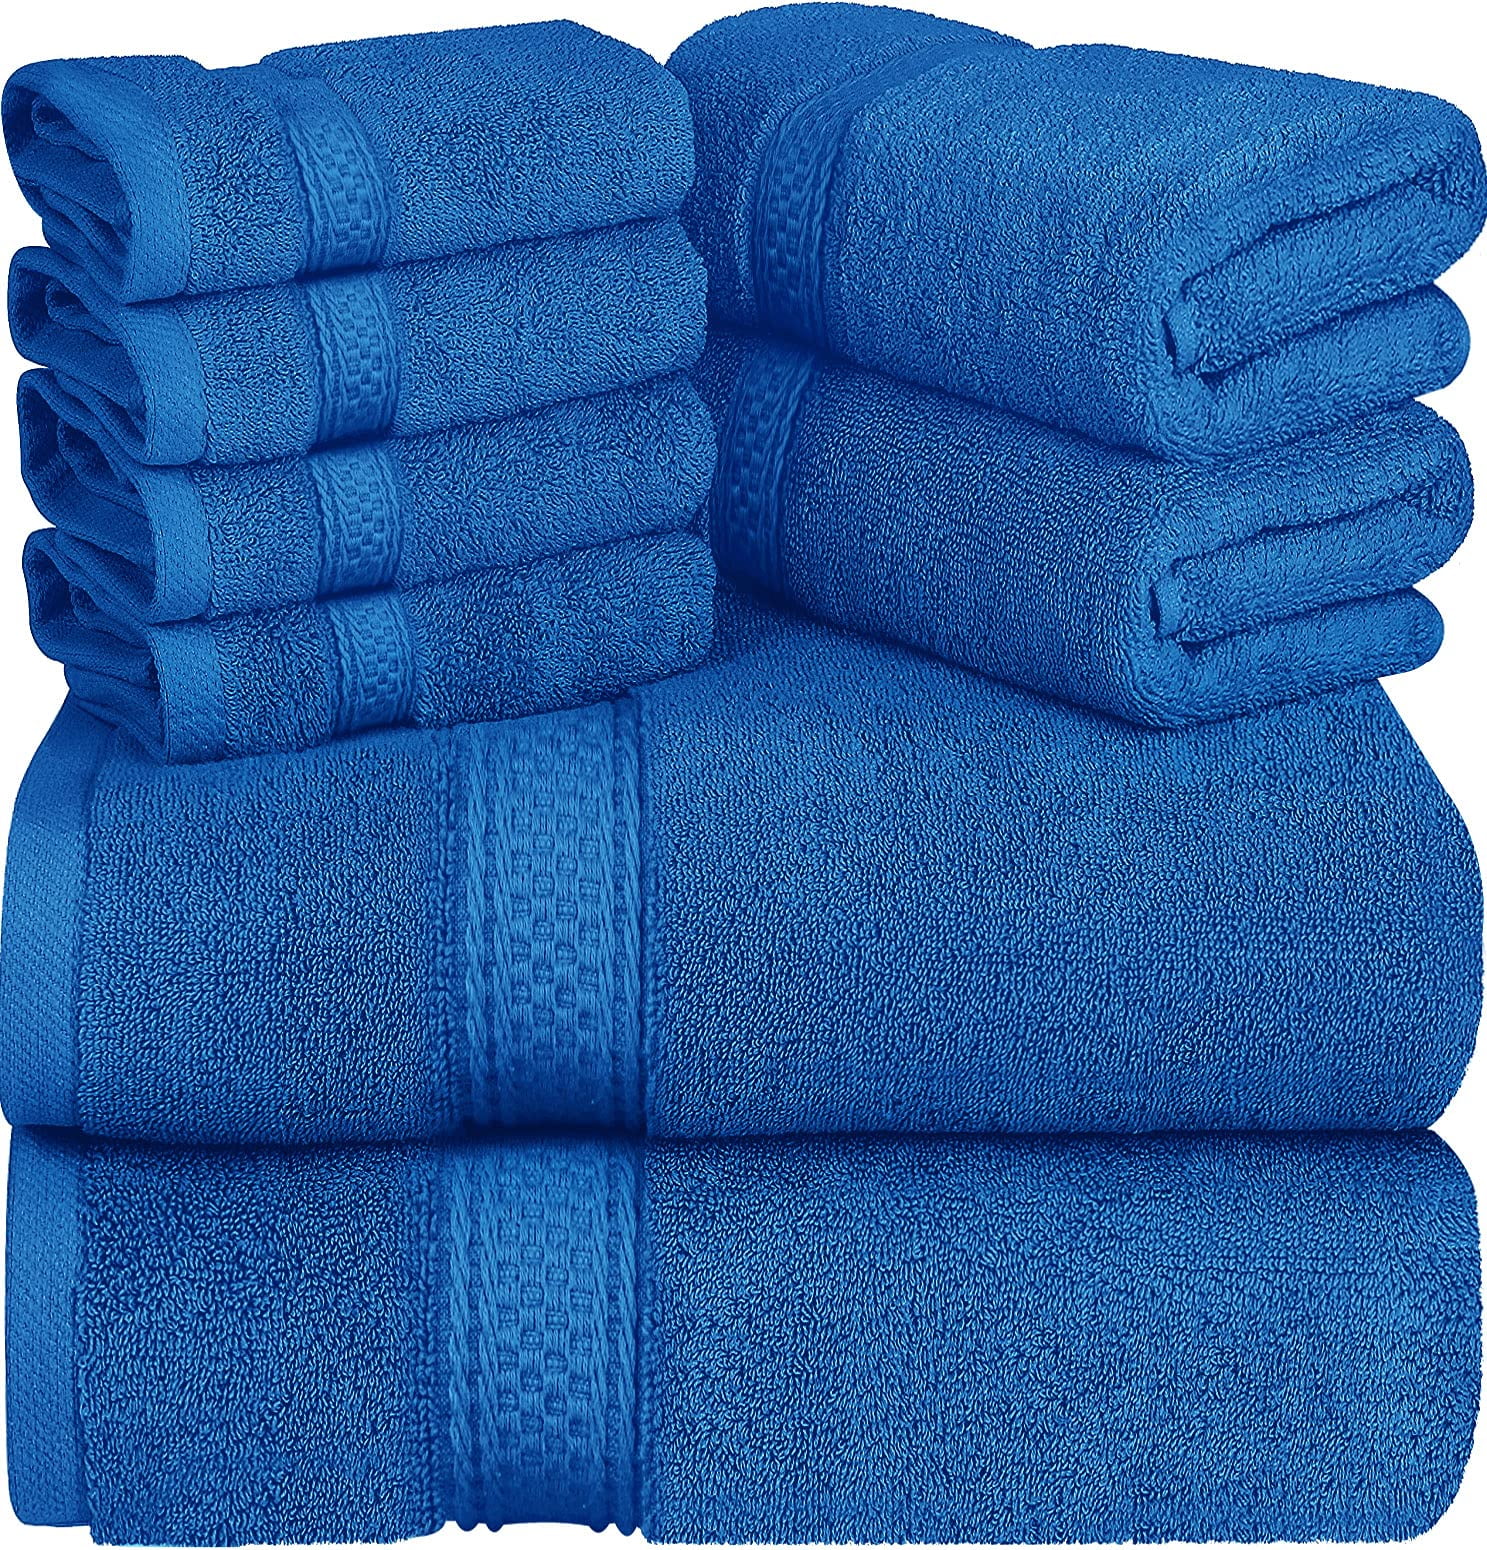 SUPERIOR Egyptian Cotton Bath Towels, Ultra Soft Luxury Towel, Thick Plush  Essentials, Absorbent Heavyweight, Guest Bath, Hotel, Resort, Spa, Home